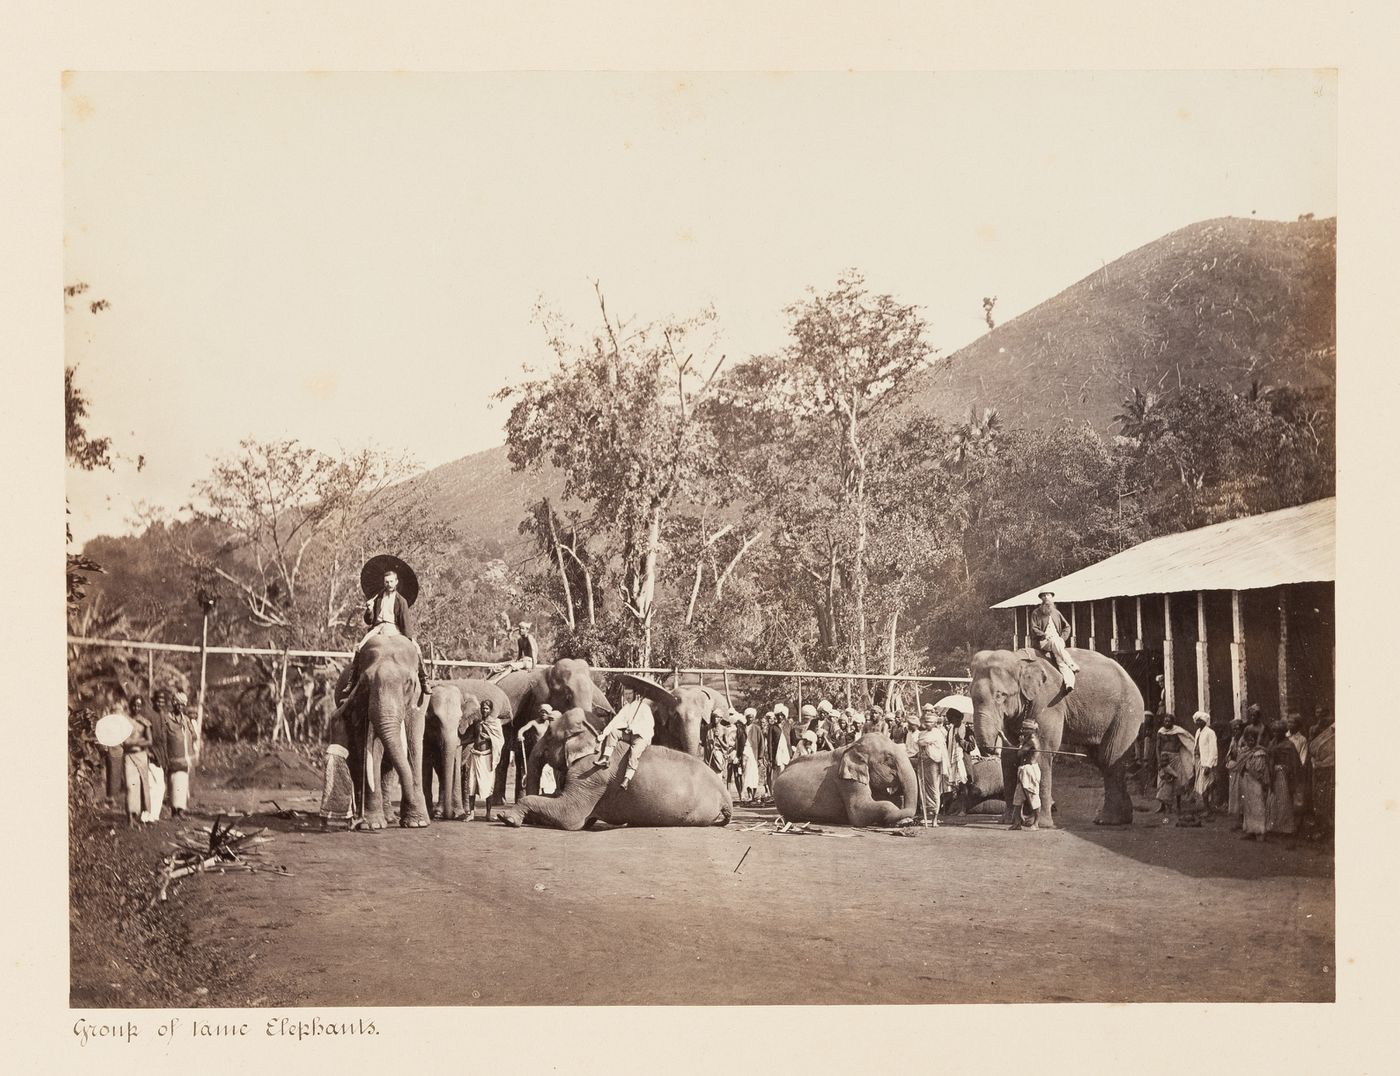 View of people and a herd of elephants on a road, Ceylon (now Sri Lanka)